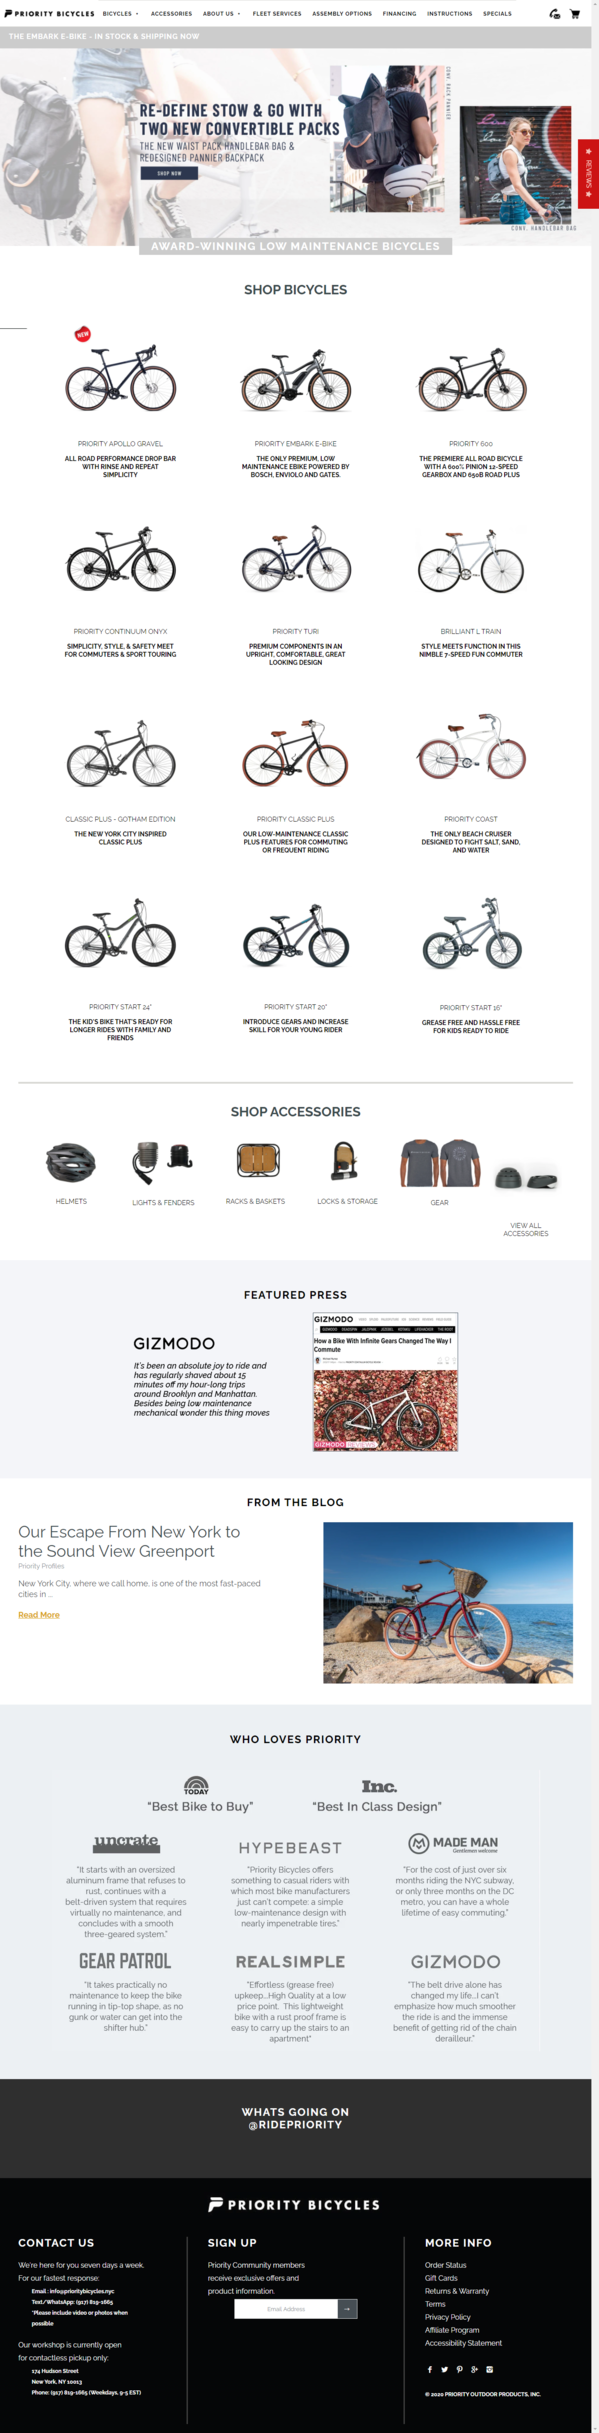 Priority Bicycles - Low Maintenance Belt Drive Bikes_ - www.prioritybicycles.com.png